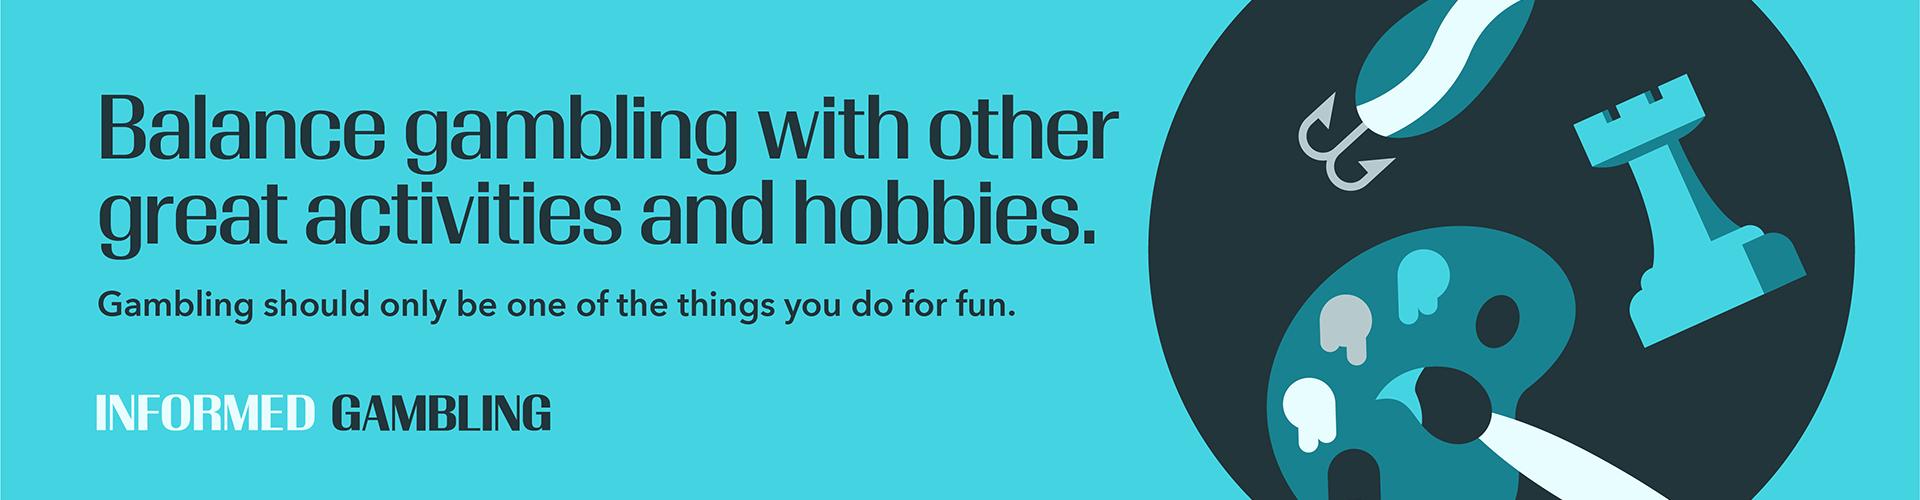 Balance gambling with other great activities and hobbies.